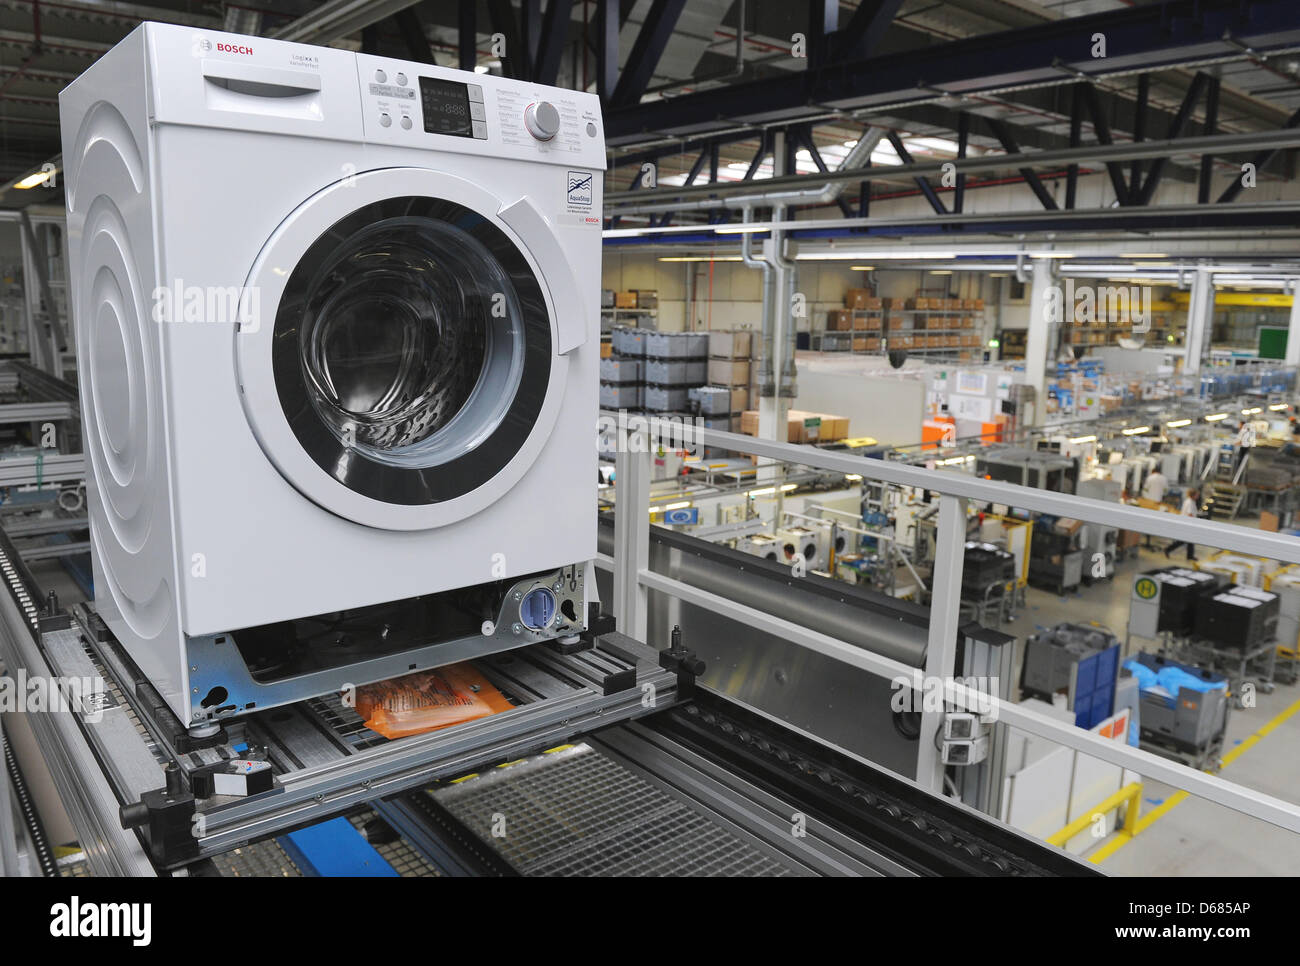 A washing machine is pictured on an assembly line at Bosch Siemens Hausgeraete  GmbH in Nauen, Germany, 4 July 2012. About 600 employees produce  approximately 800,000 premium-quality washing machines annually, of which